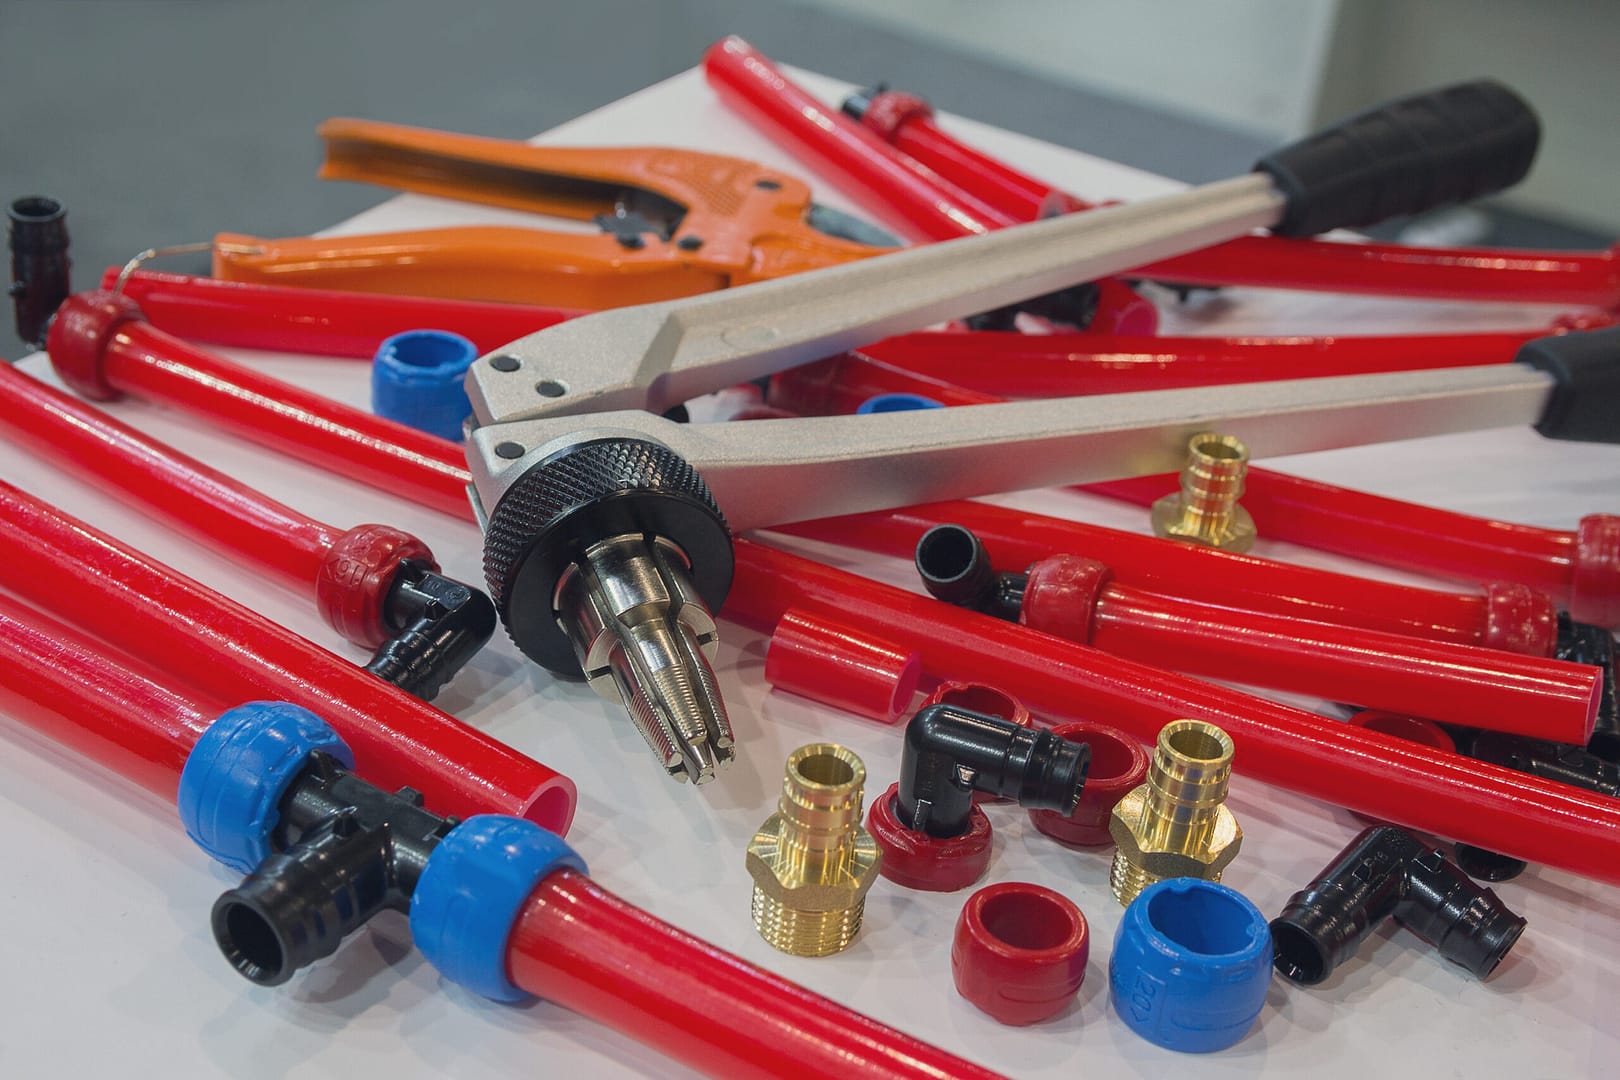 Various PEX water pipes and plumbing mounting tools neatly arranged on a table, ready for installation and plumbing work.